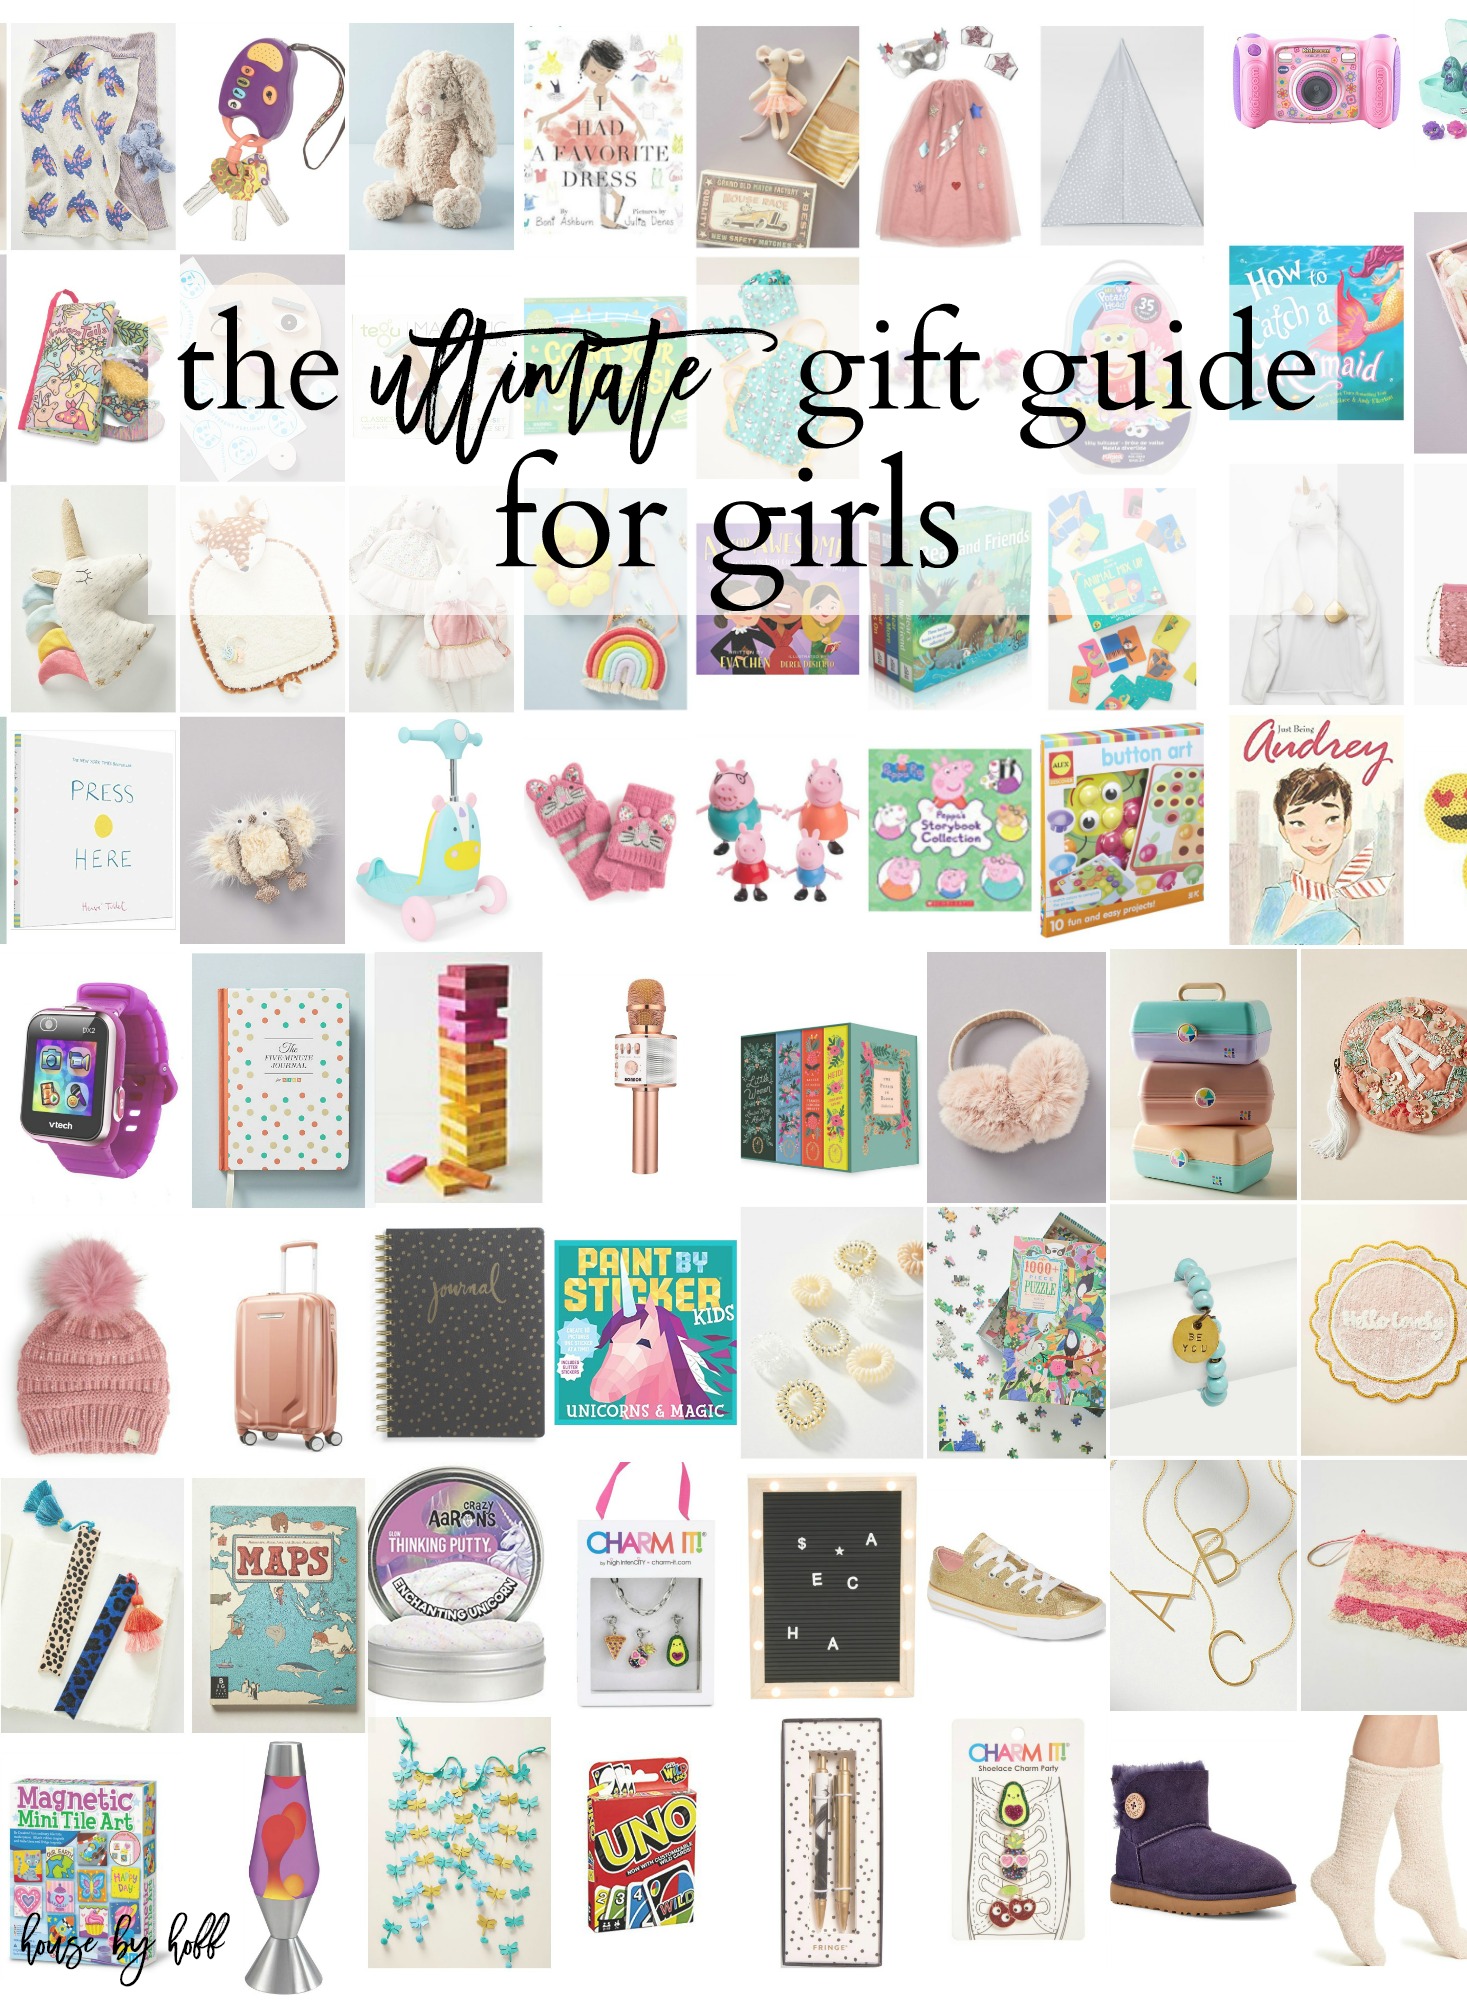 https://www.housebyhoff.com/wp-content/uploads/2019/11/The-Ultimate-Gift-Guide-for-Girls-.jpg